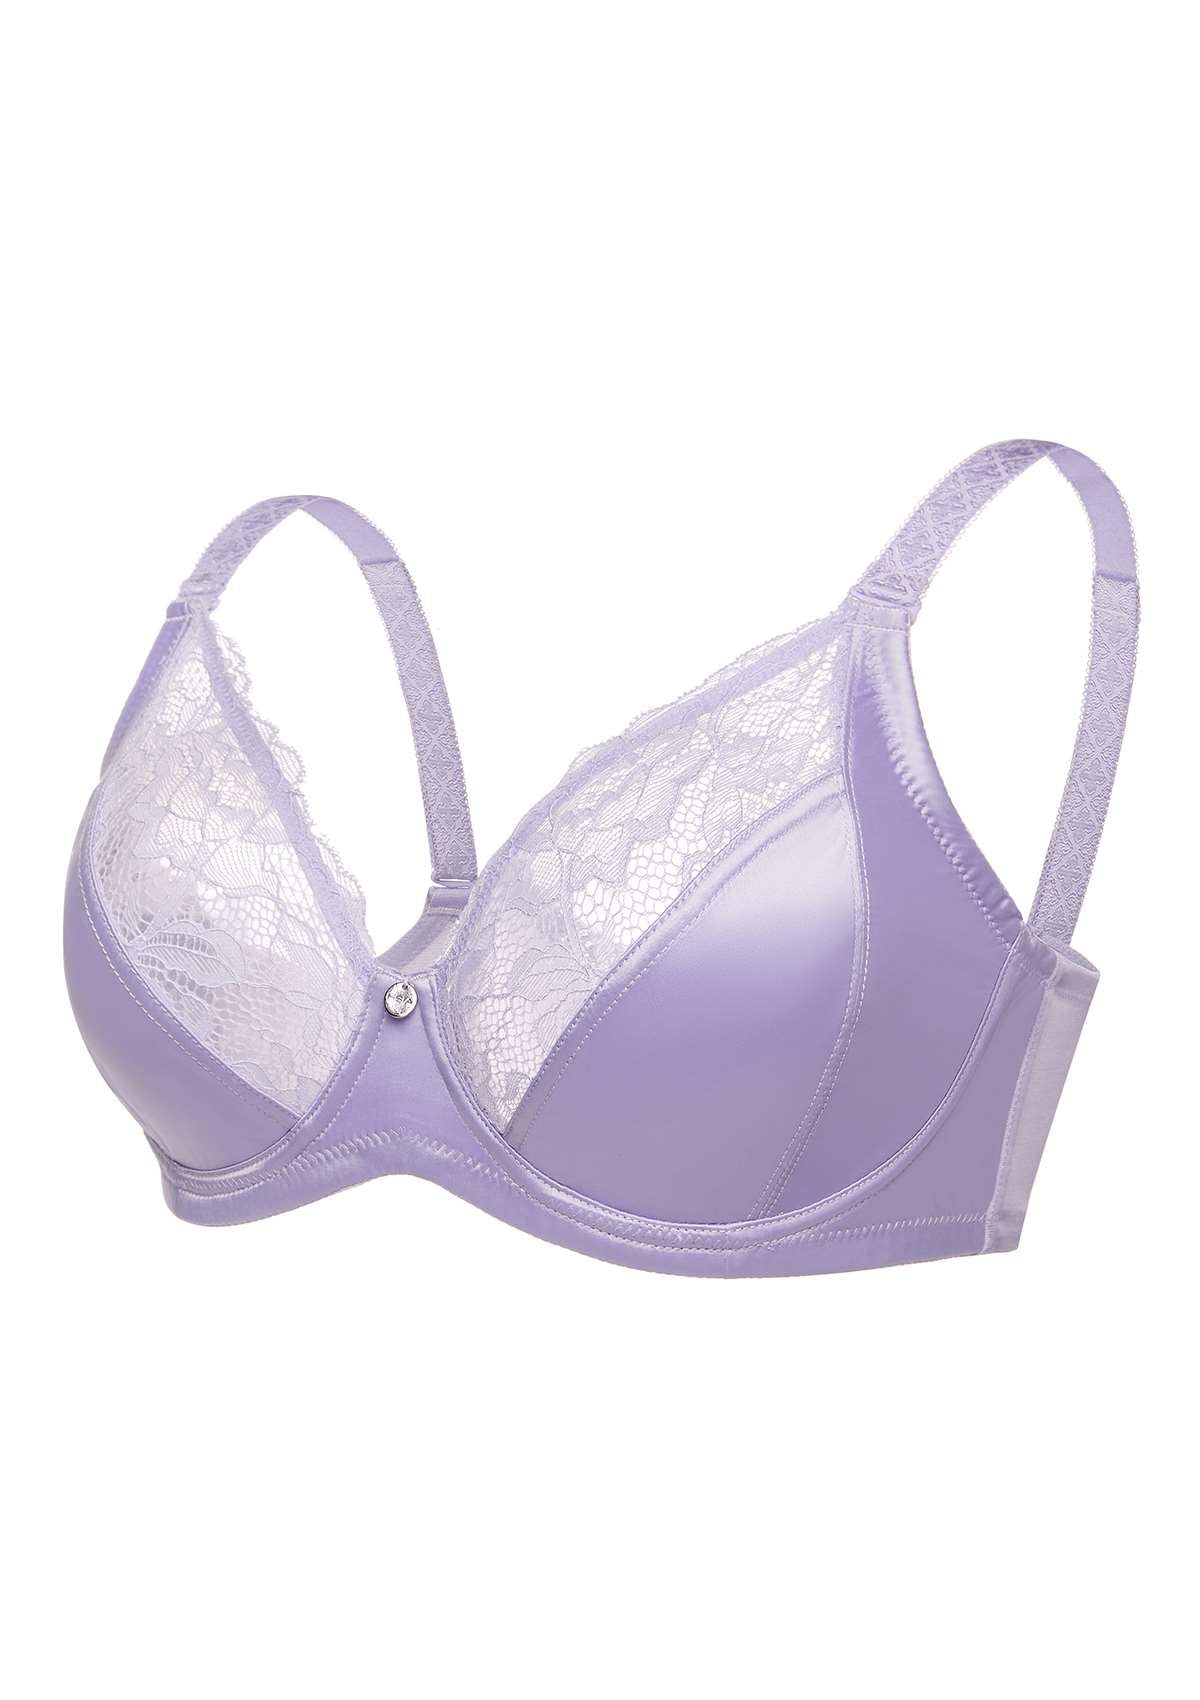 HSIA Foxy Satin Smooth Floral Lace Full Coverage Underwire Bra Set - Purple / 36 / D